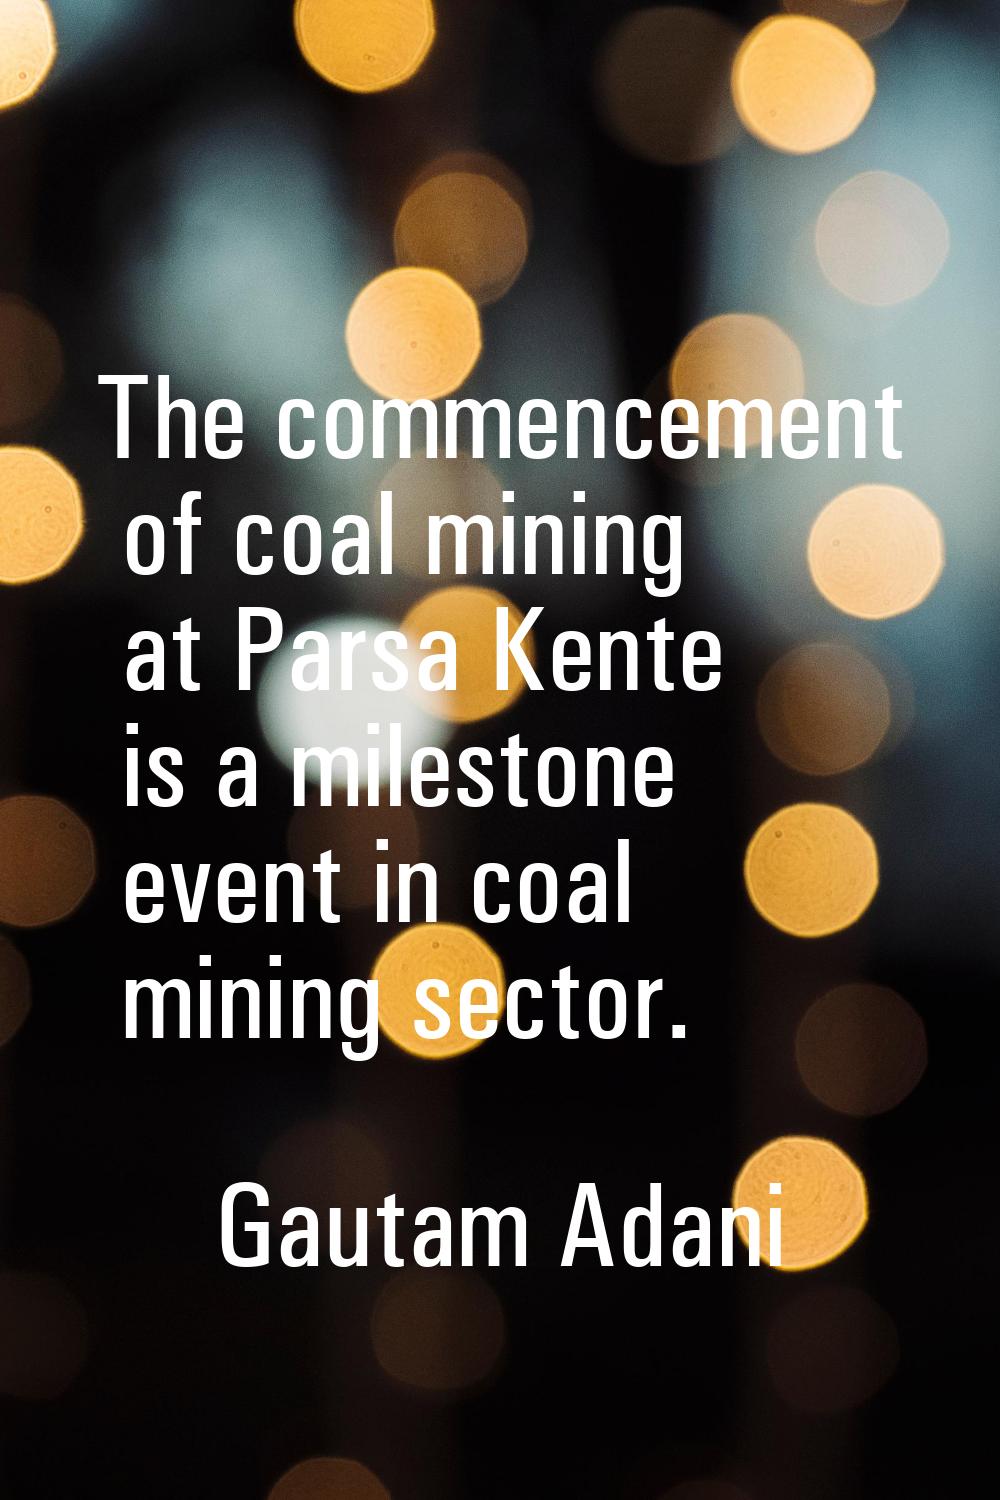 The commencement of coal mining at Parsa Kente is a milestone event in coal mining sector.